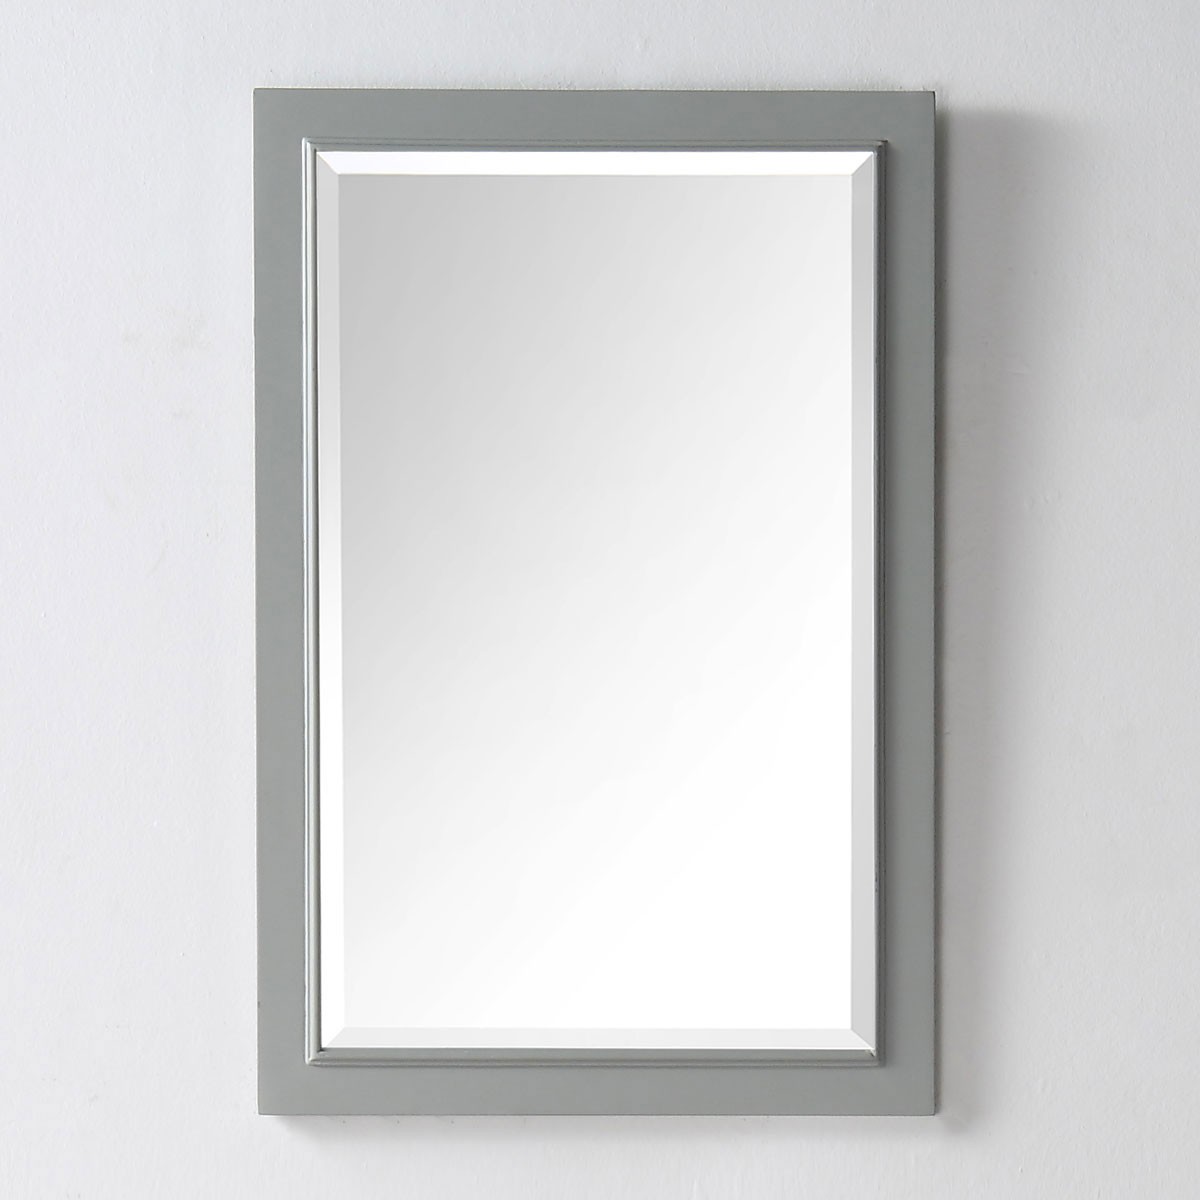 24 x 36 In Mirror with Cool Gray Frame (DK-6000-CGM)